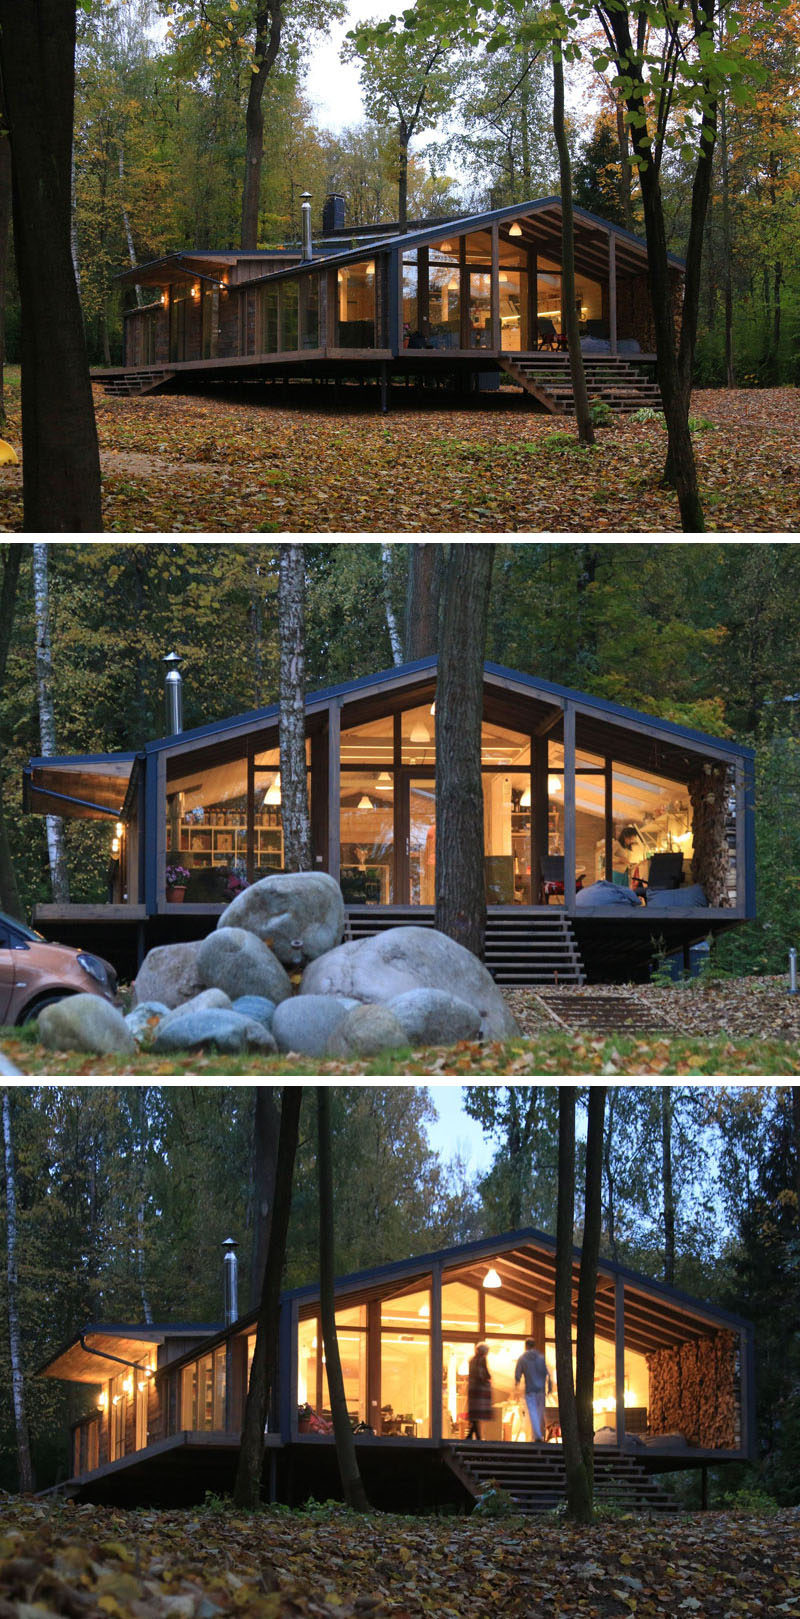 This rustic modern house in a forest has a modular design, with metal framing combined with barn board and glass to create a look that fits in with the surrounding environment.